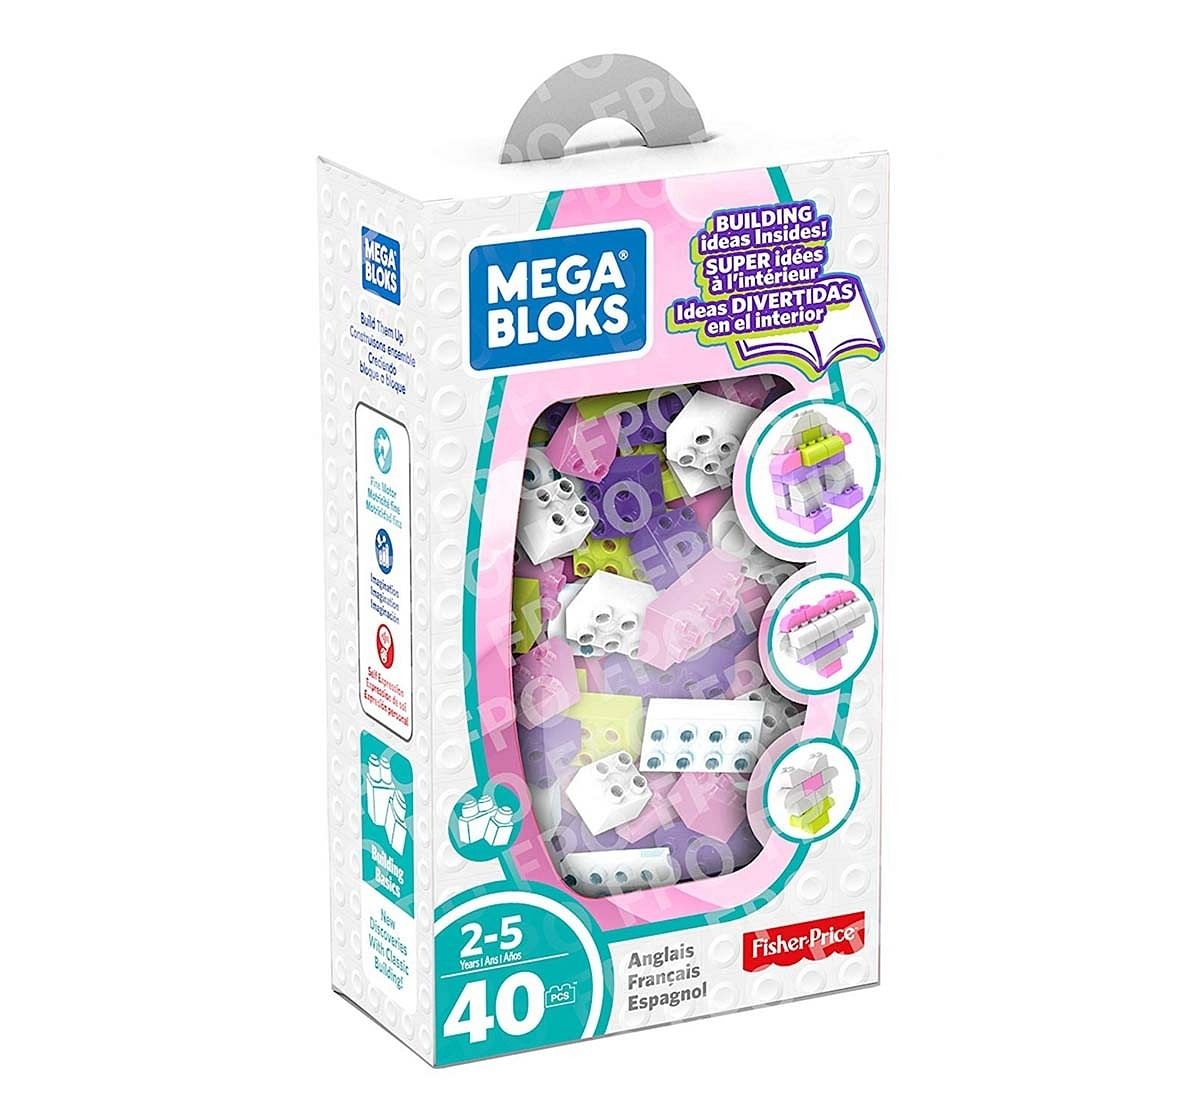 Mega Blocks I Can Build Small Box Girl Toddler Blocks for Kids age 24M+, Assorted